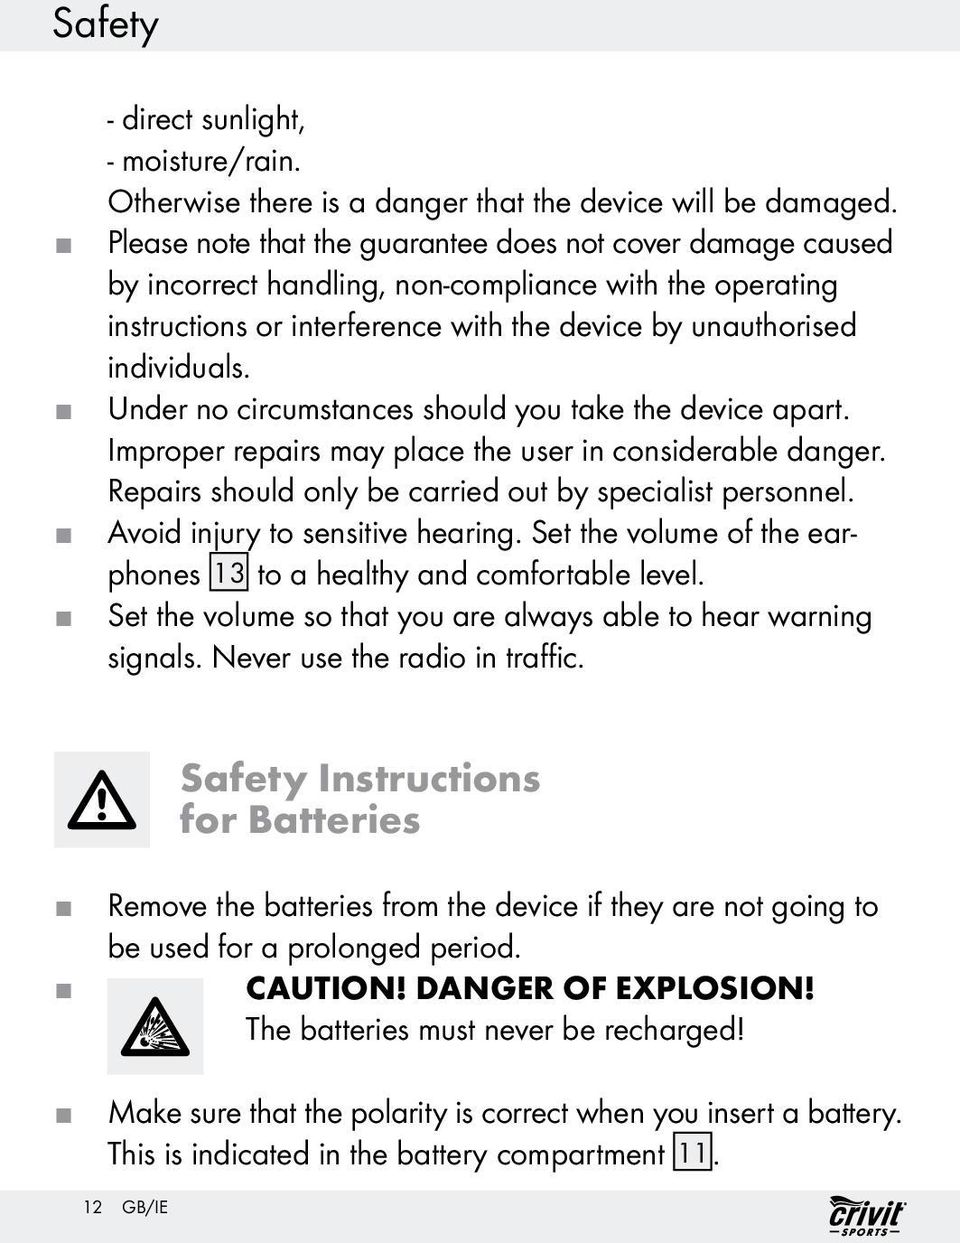 Under no circumstances should you take the device apart. Improper repairs may place the user in considerable danger. Repairs should only be carried out by specialist personnel.